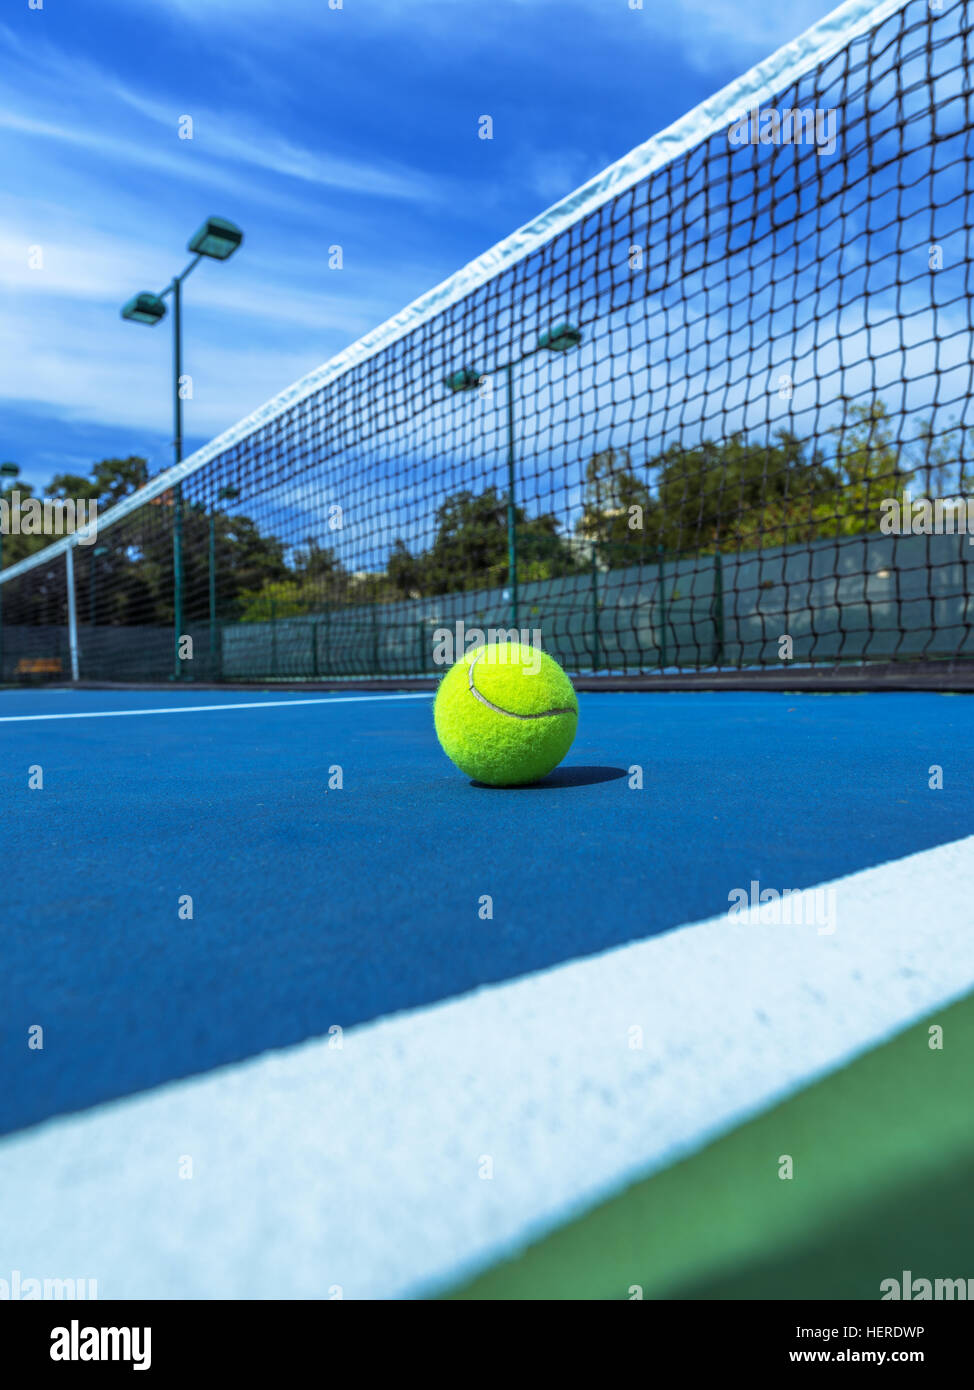 Tennis Ball on Blue Court, Doubles Sideline and Net Stock Photo